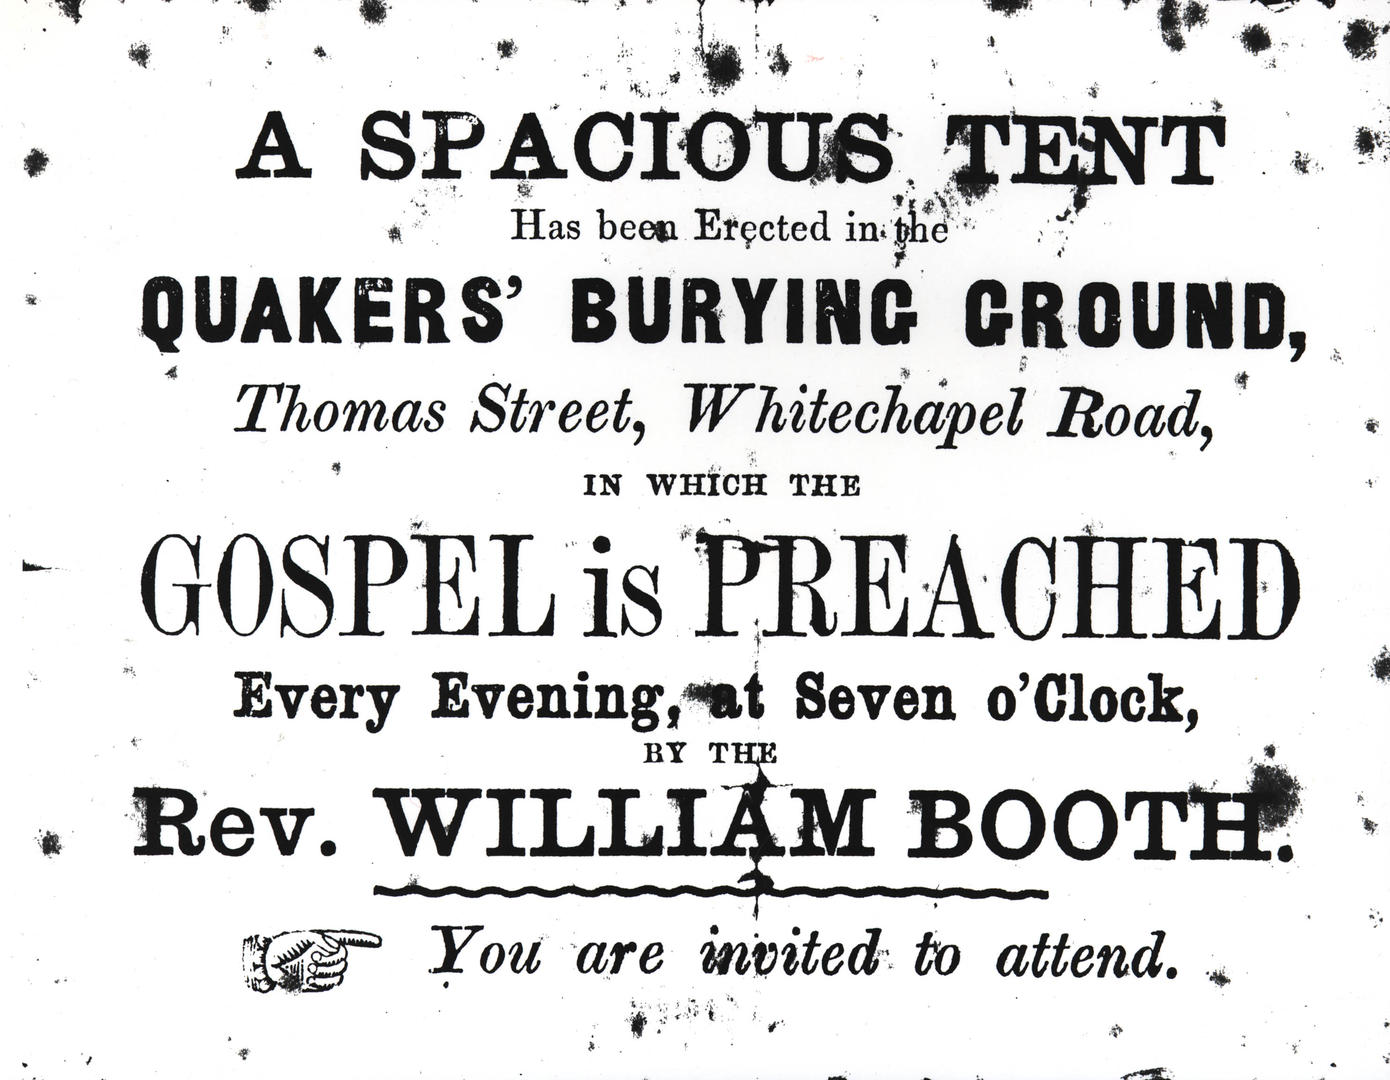 Tent meeting poster, 1865